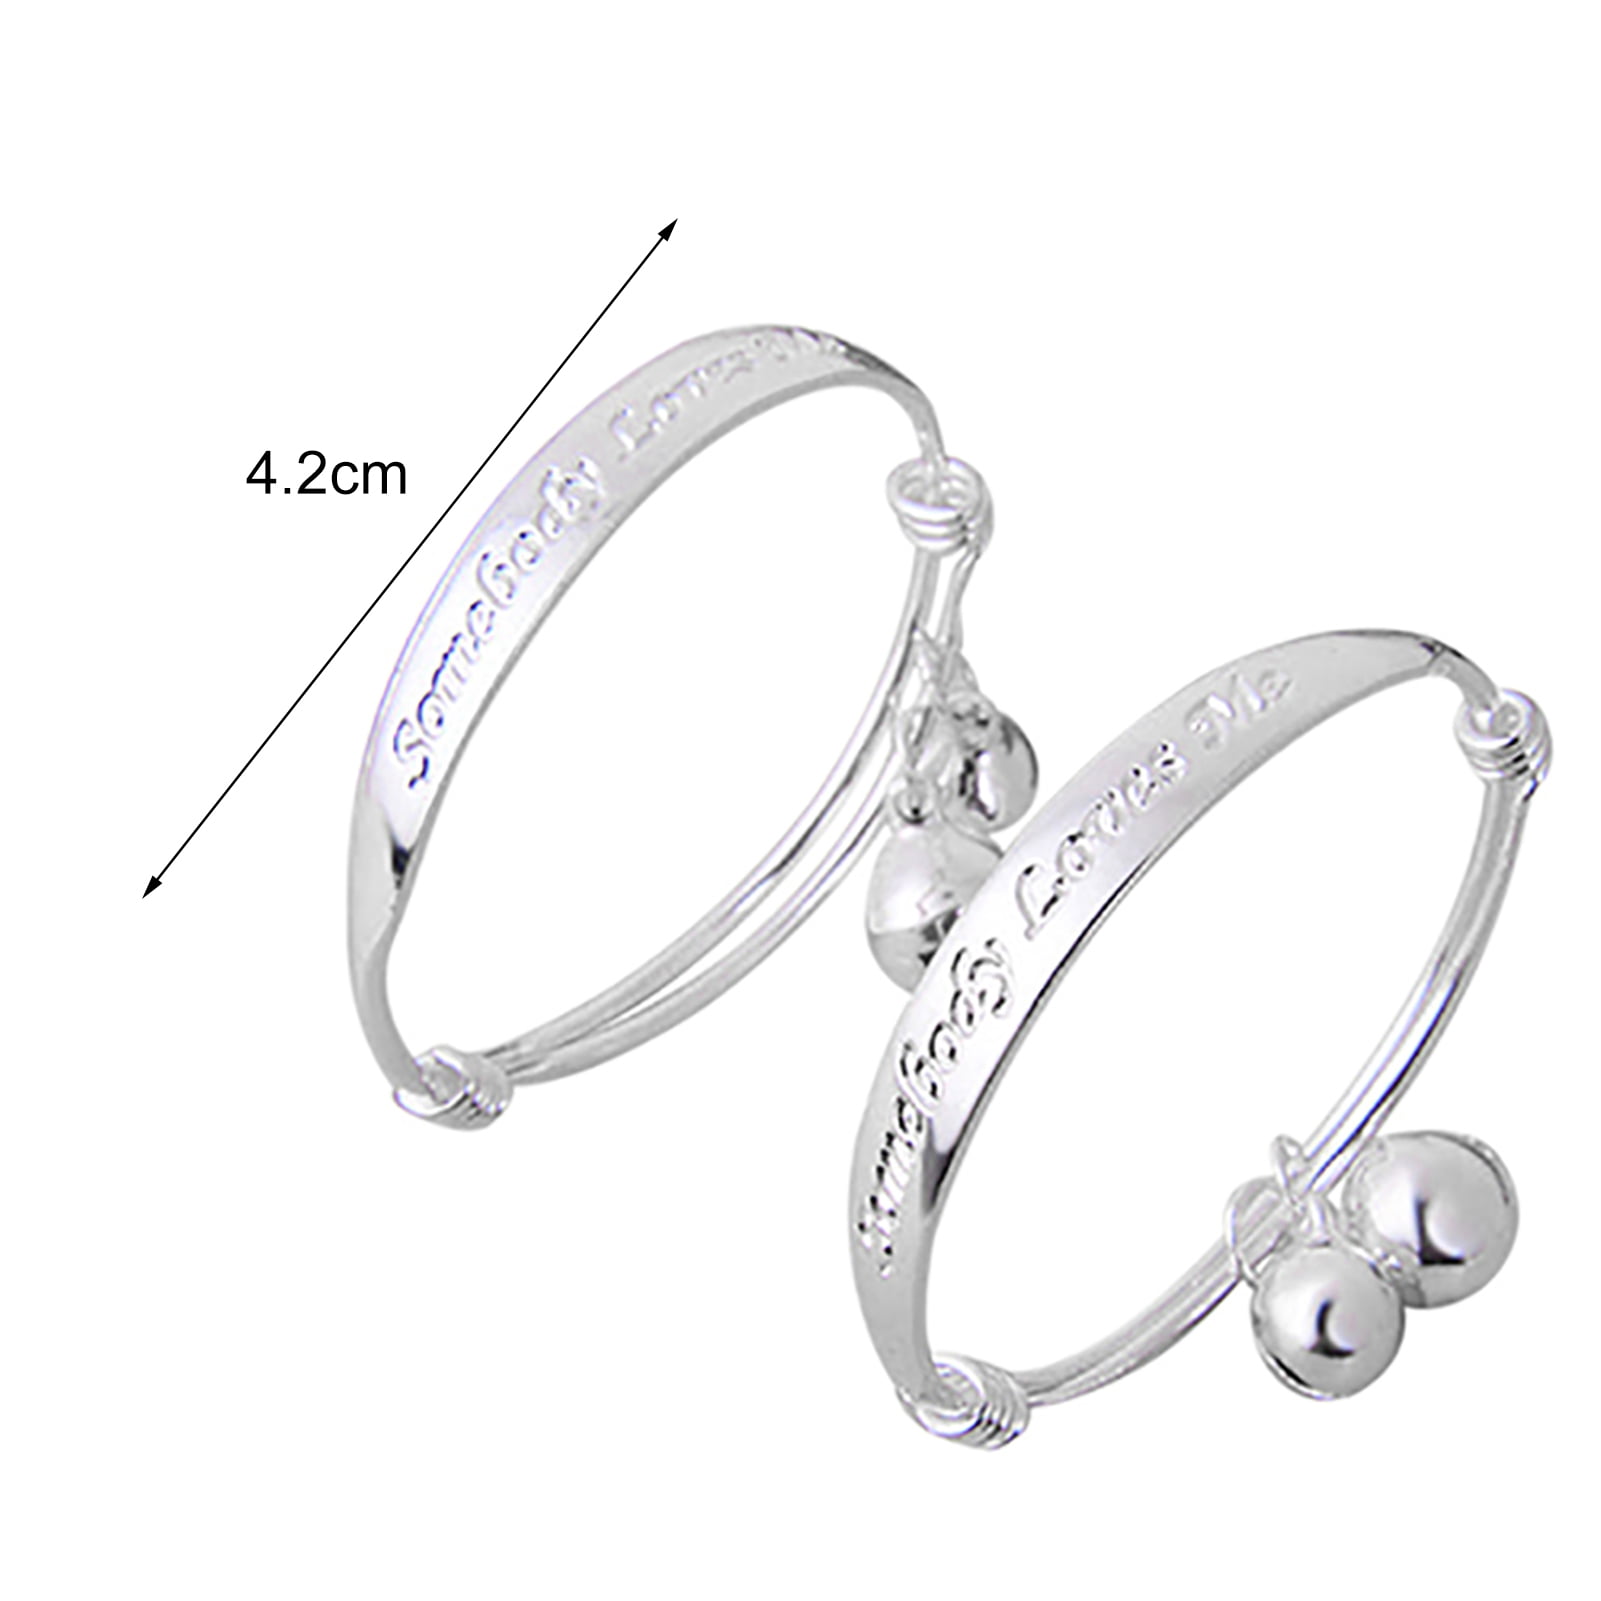 2x Best Charms Silver Plated Baby Kids Bangle Bells Bracelet Jewellerys Gift New 